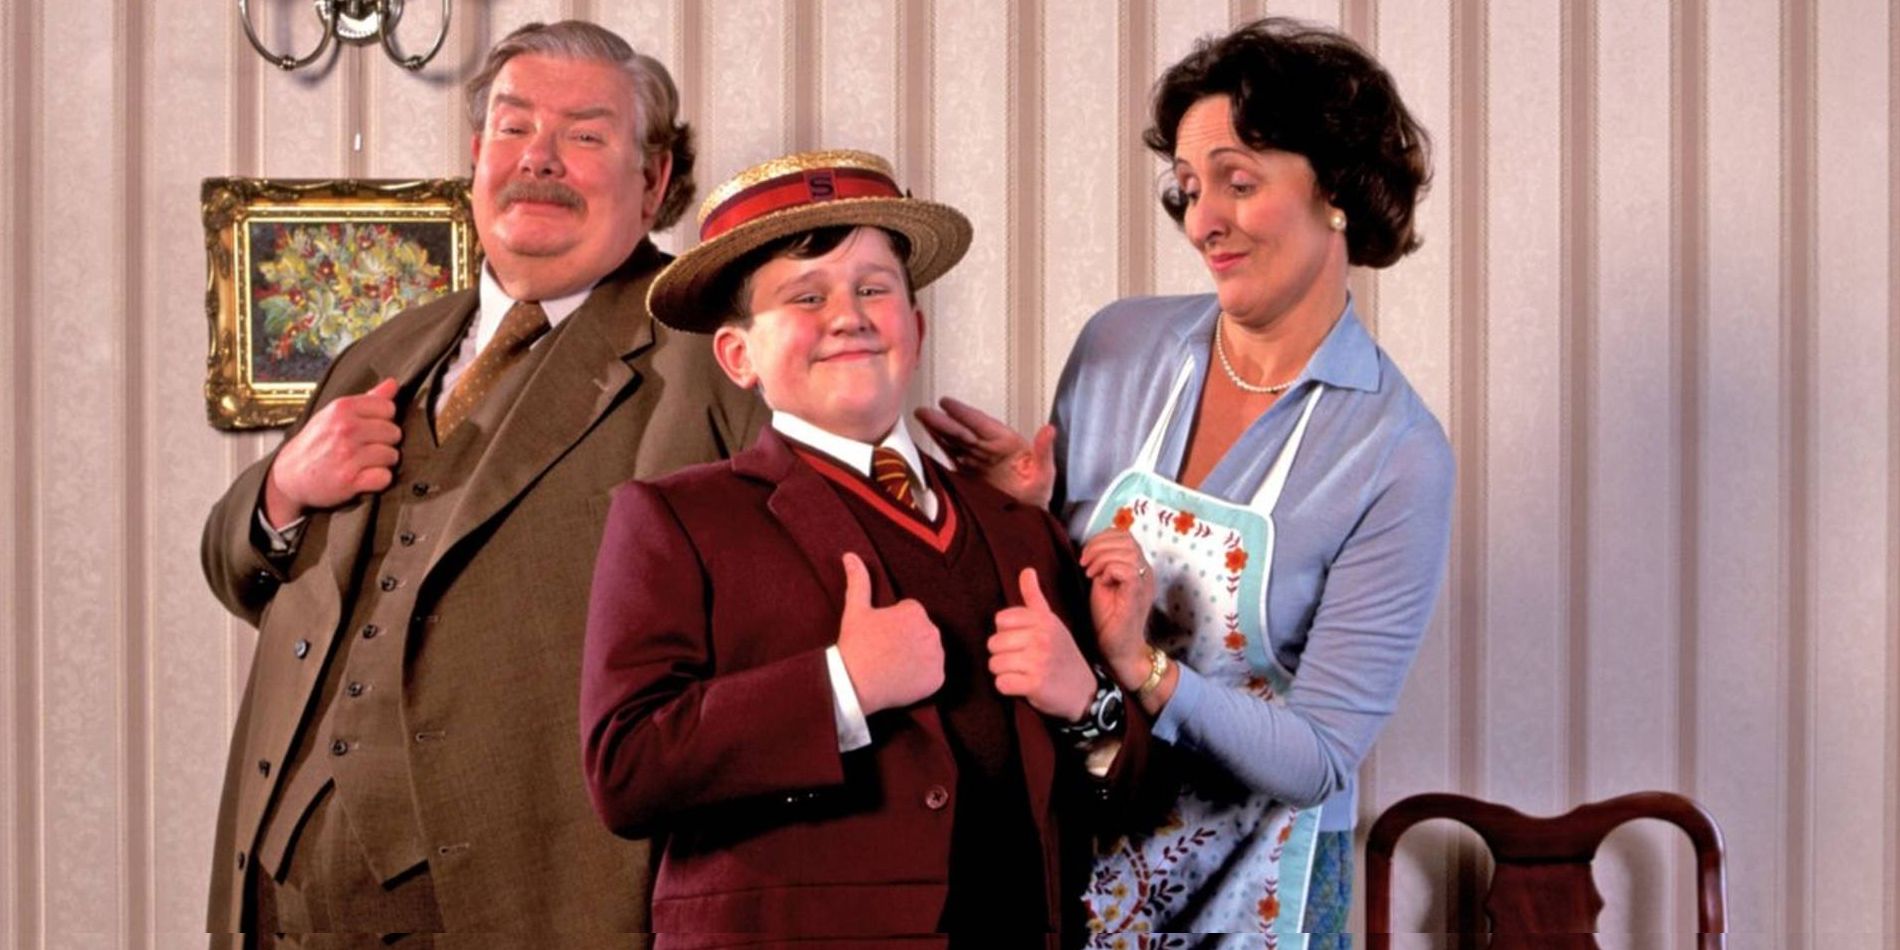 The Dursley family posing together in Harry Potter.